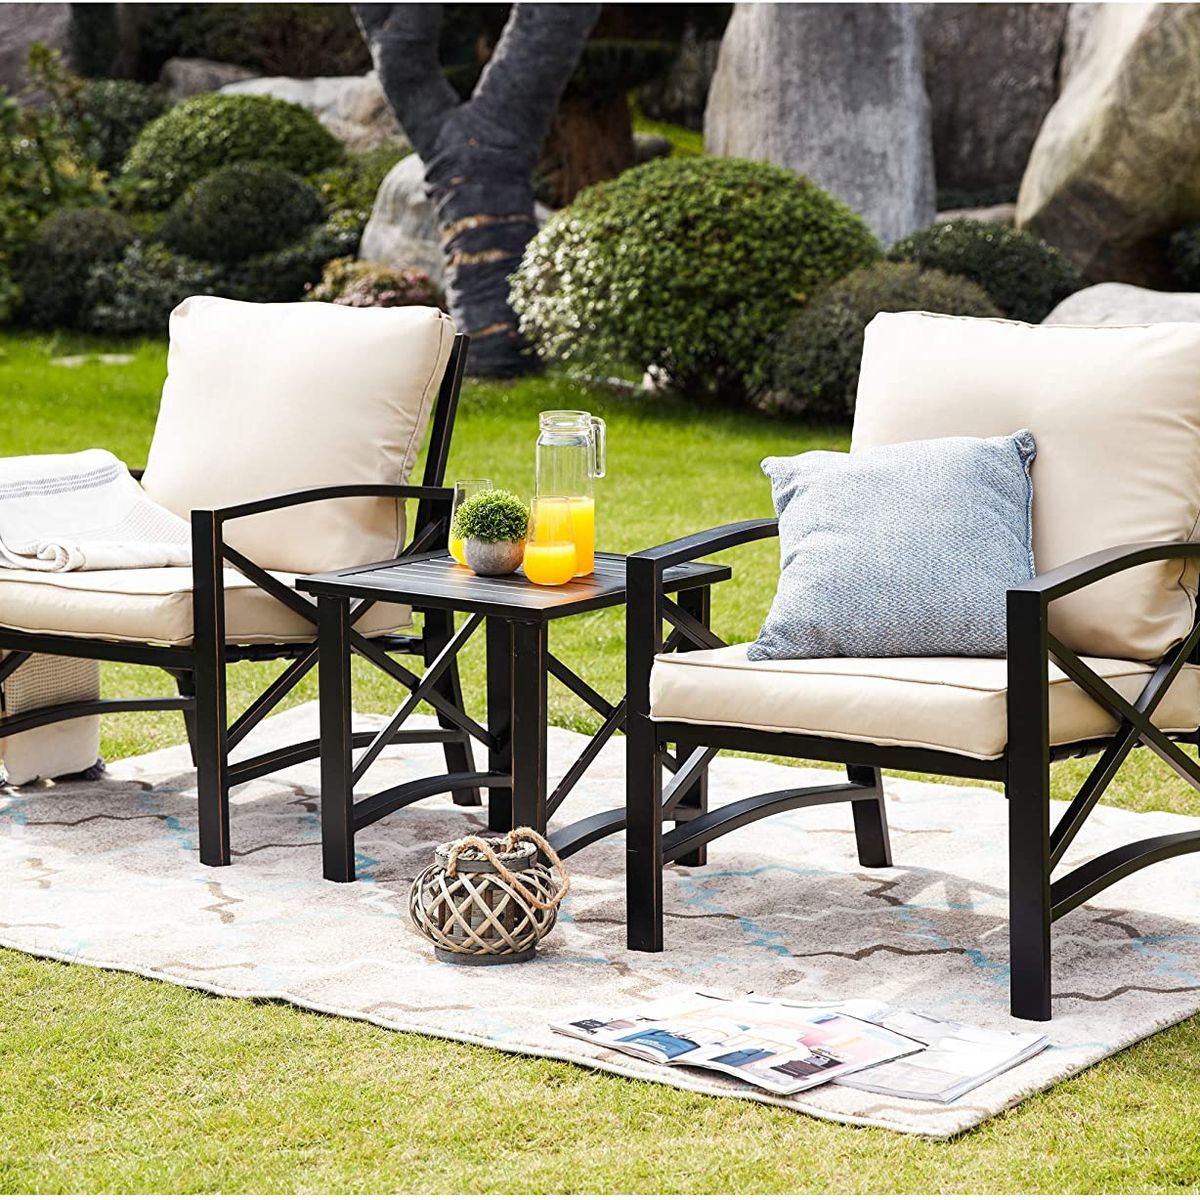 8 Best Patio Furniture Sets 2022 The, Comfortable Outdoor Furniture Sets